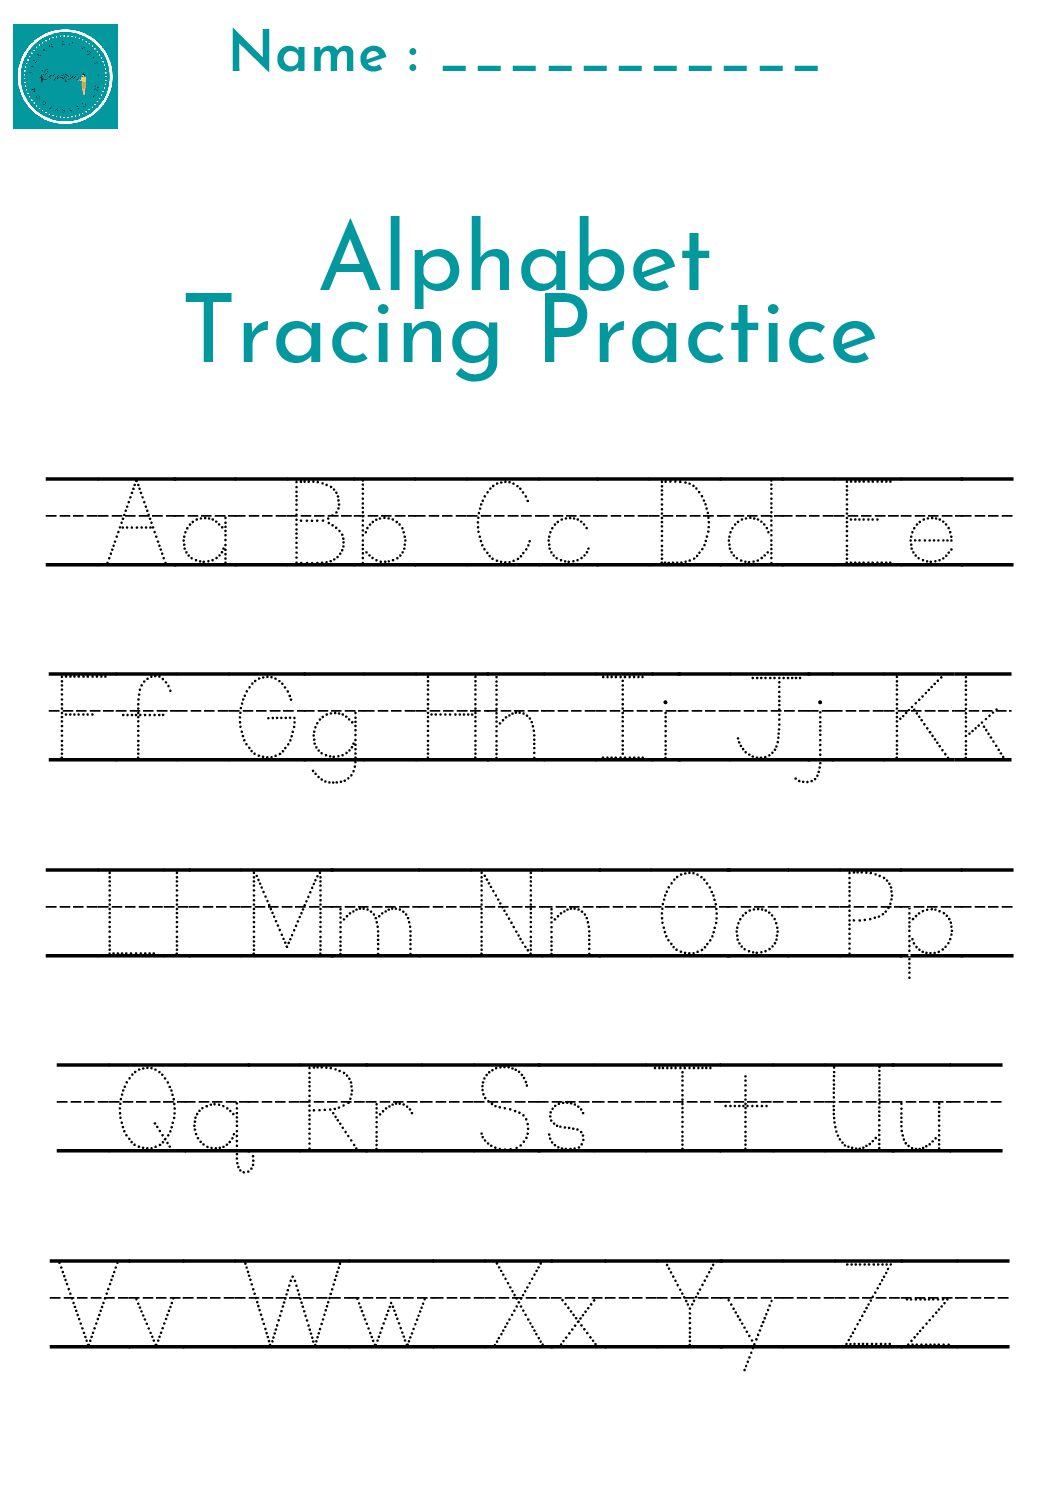 learn-arabic-alphabet-letters-free-printable-worksheets